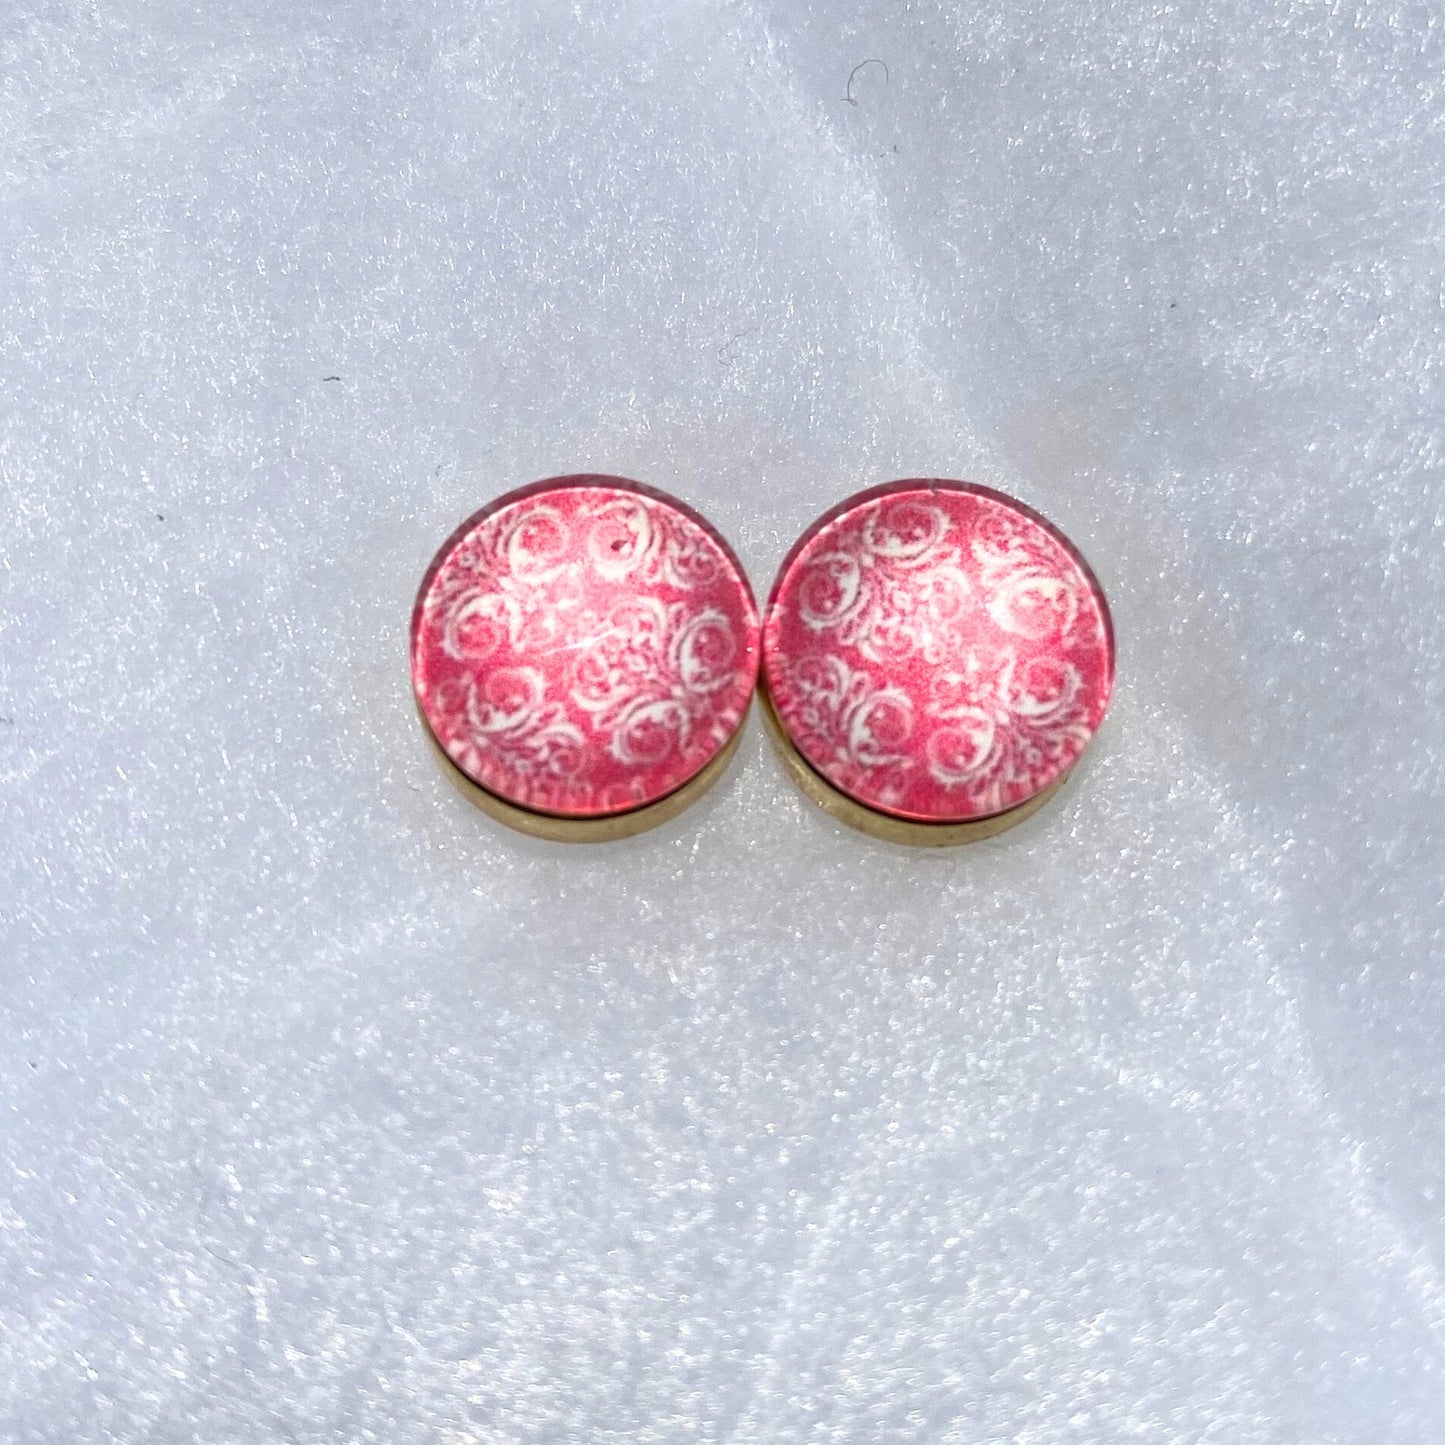 Hijab Magnets | Hijab Pins| Hijab Closure | Jeweled Scarf Accessories |Eid Muslim Gift | Pink and White Magnet | Scarf Magnet | FREE SHIP